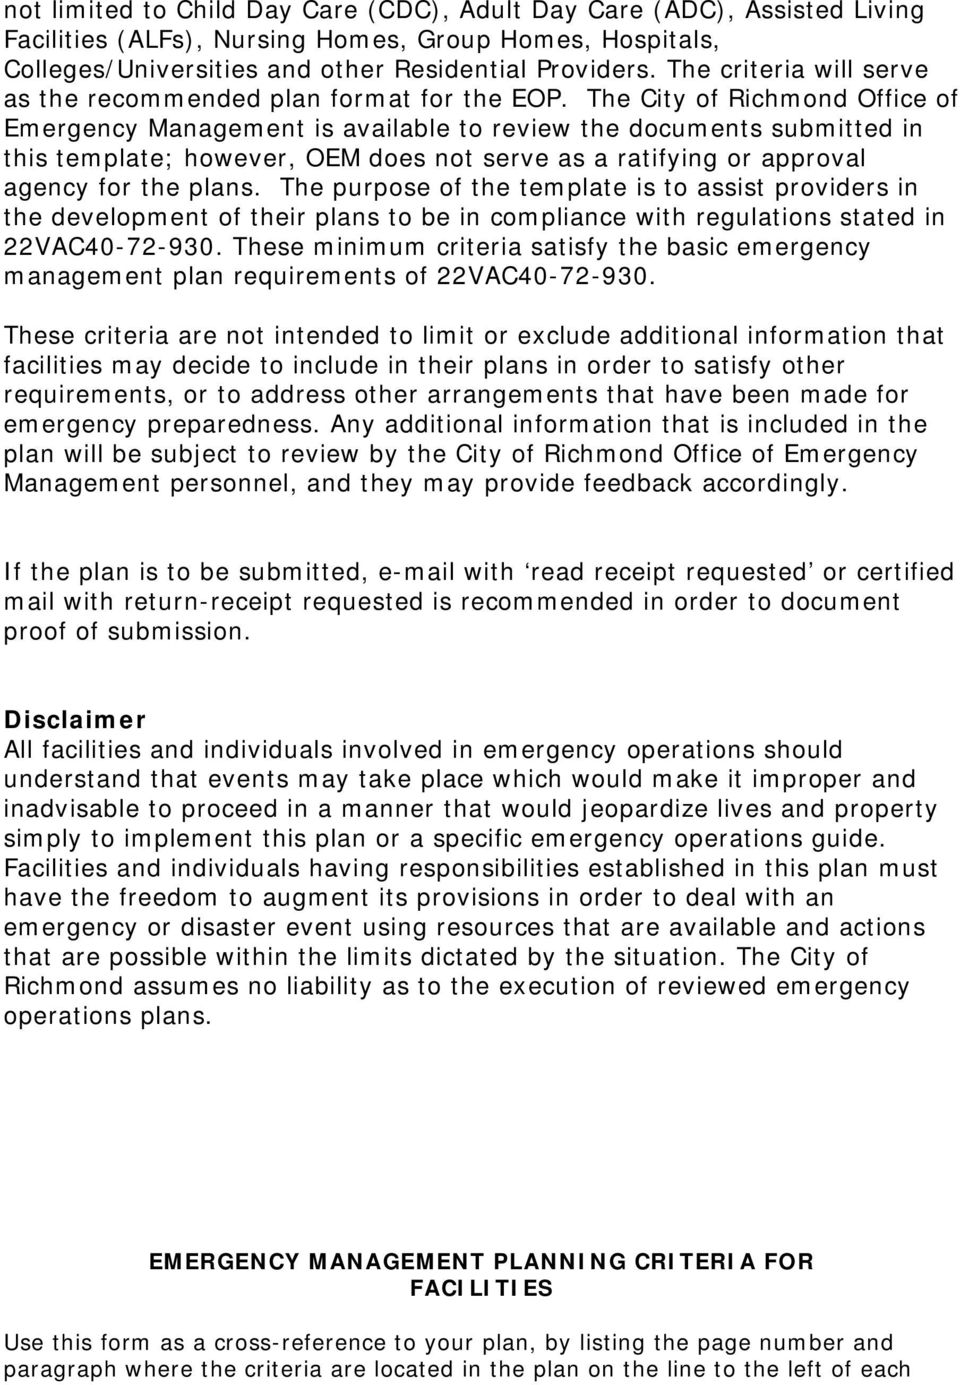 The City of Richmond Office of Emergency Management is available to review the documents submitted in this template; however, OEM does not serve as a ratifying or approval agency for the plans.